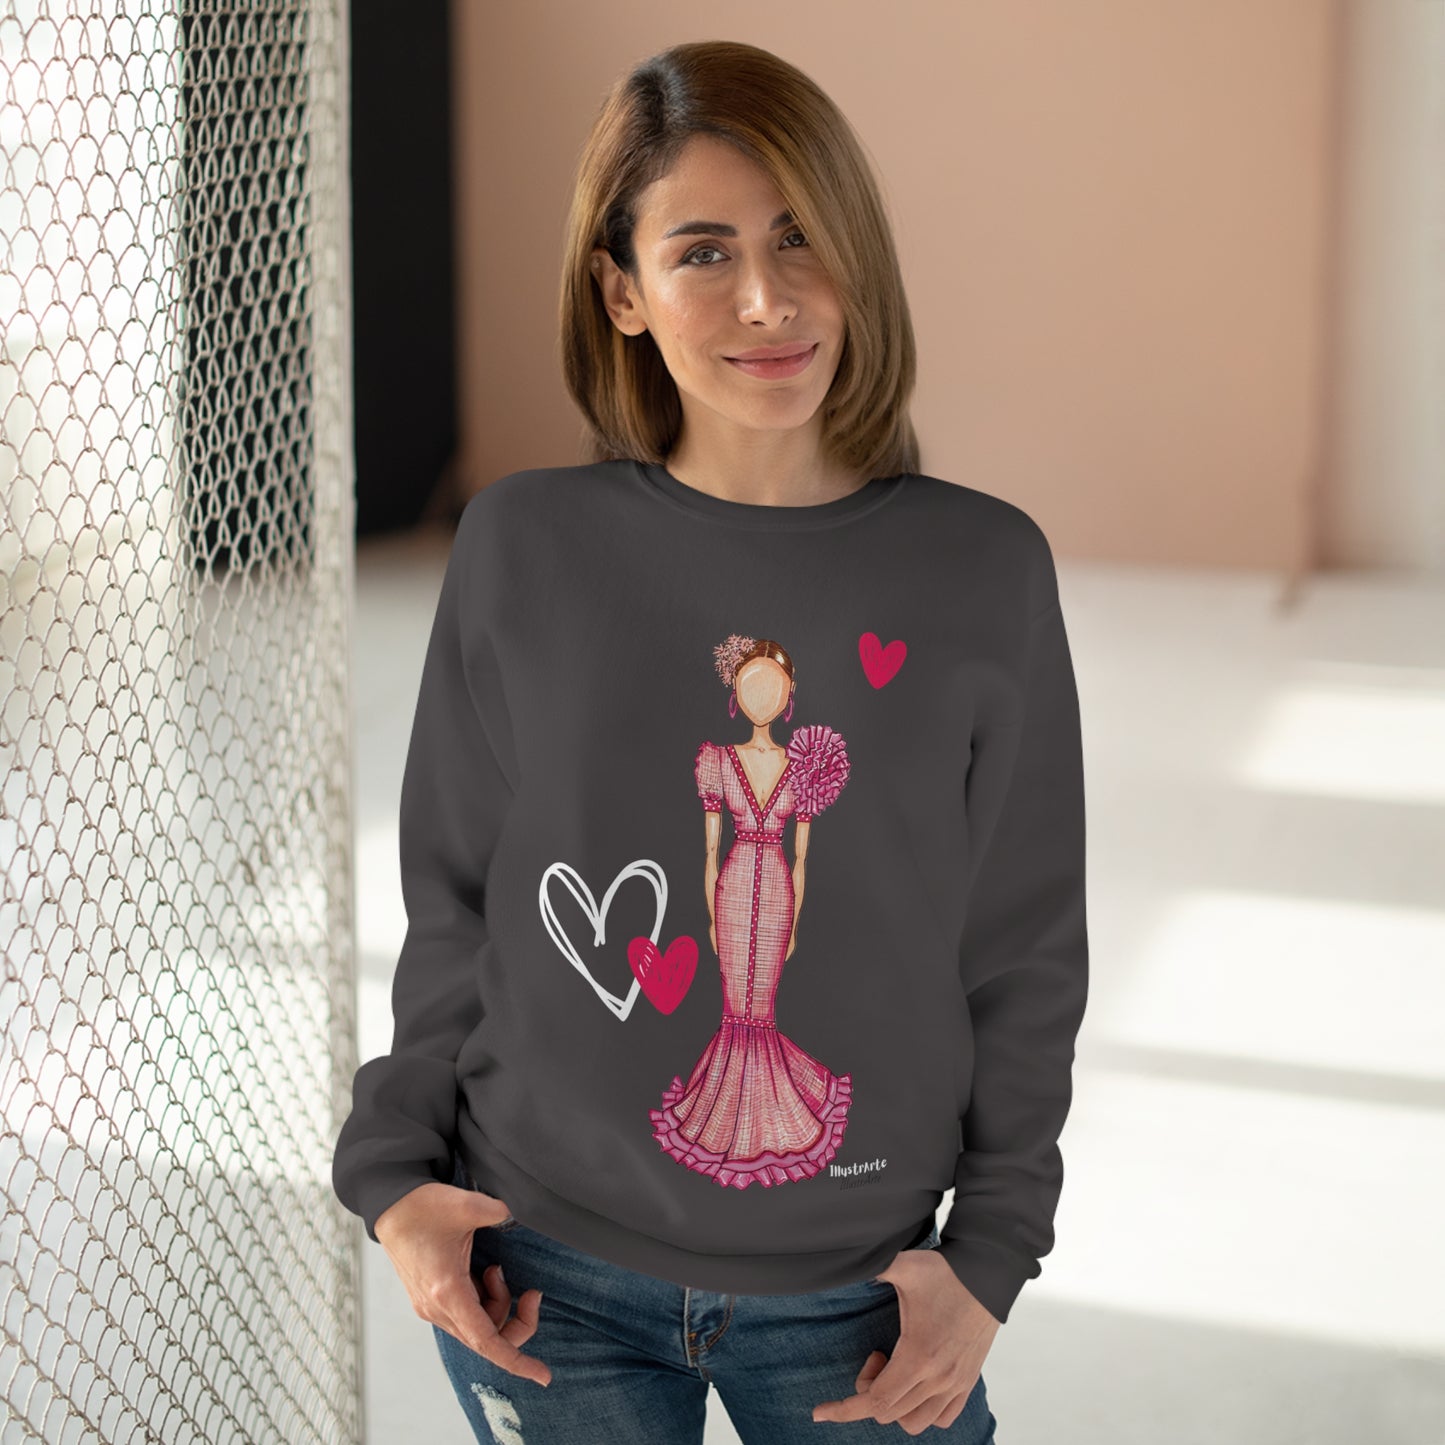 a woman wearing a sweater with a dress on it